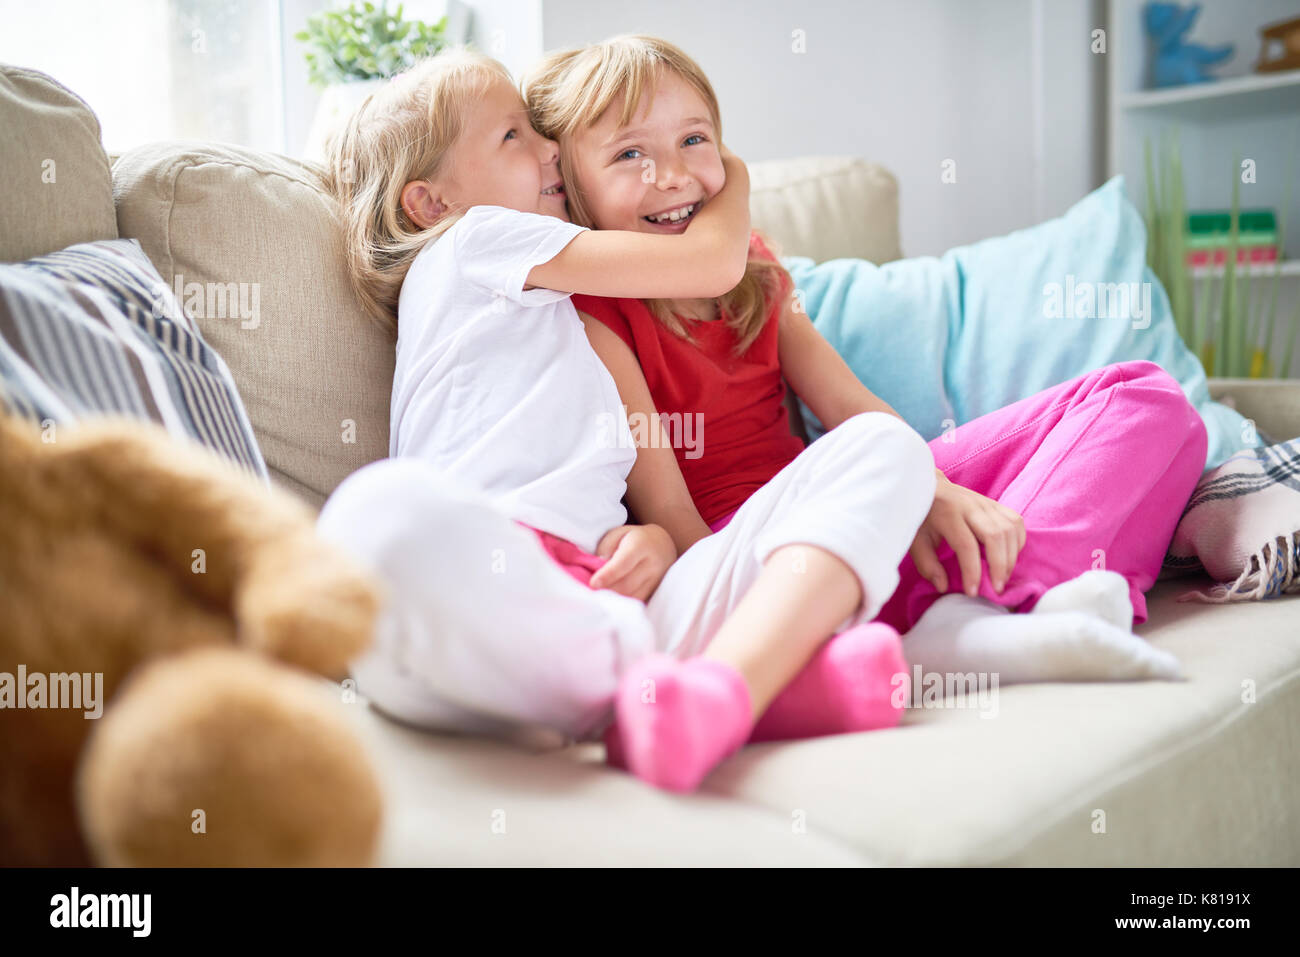 Cute blond-haired girl sharing secret with her smiling elder sister while spending weekend together at cozy living room Stock Photo